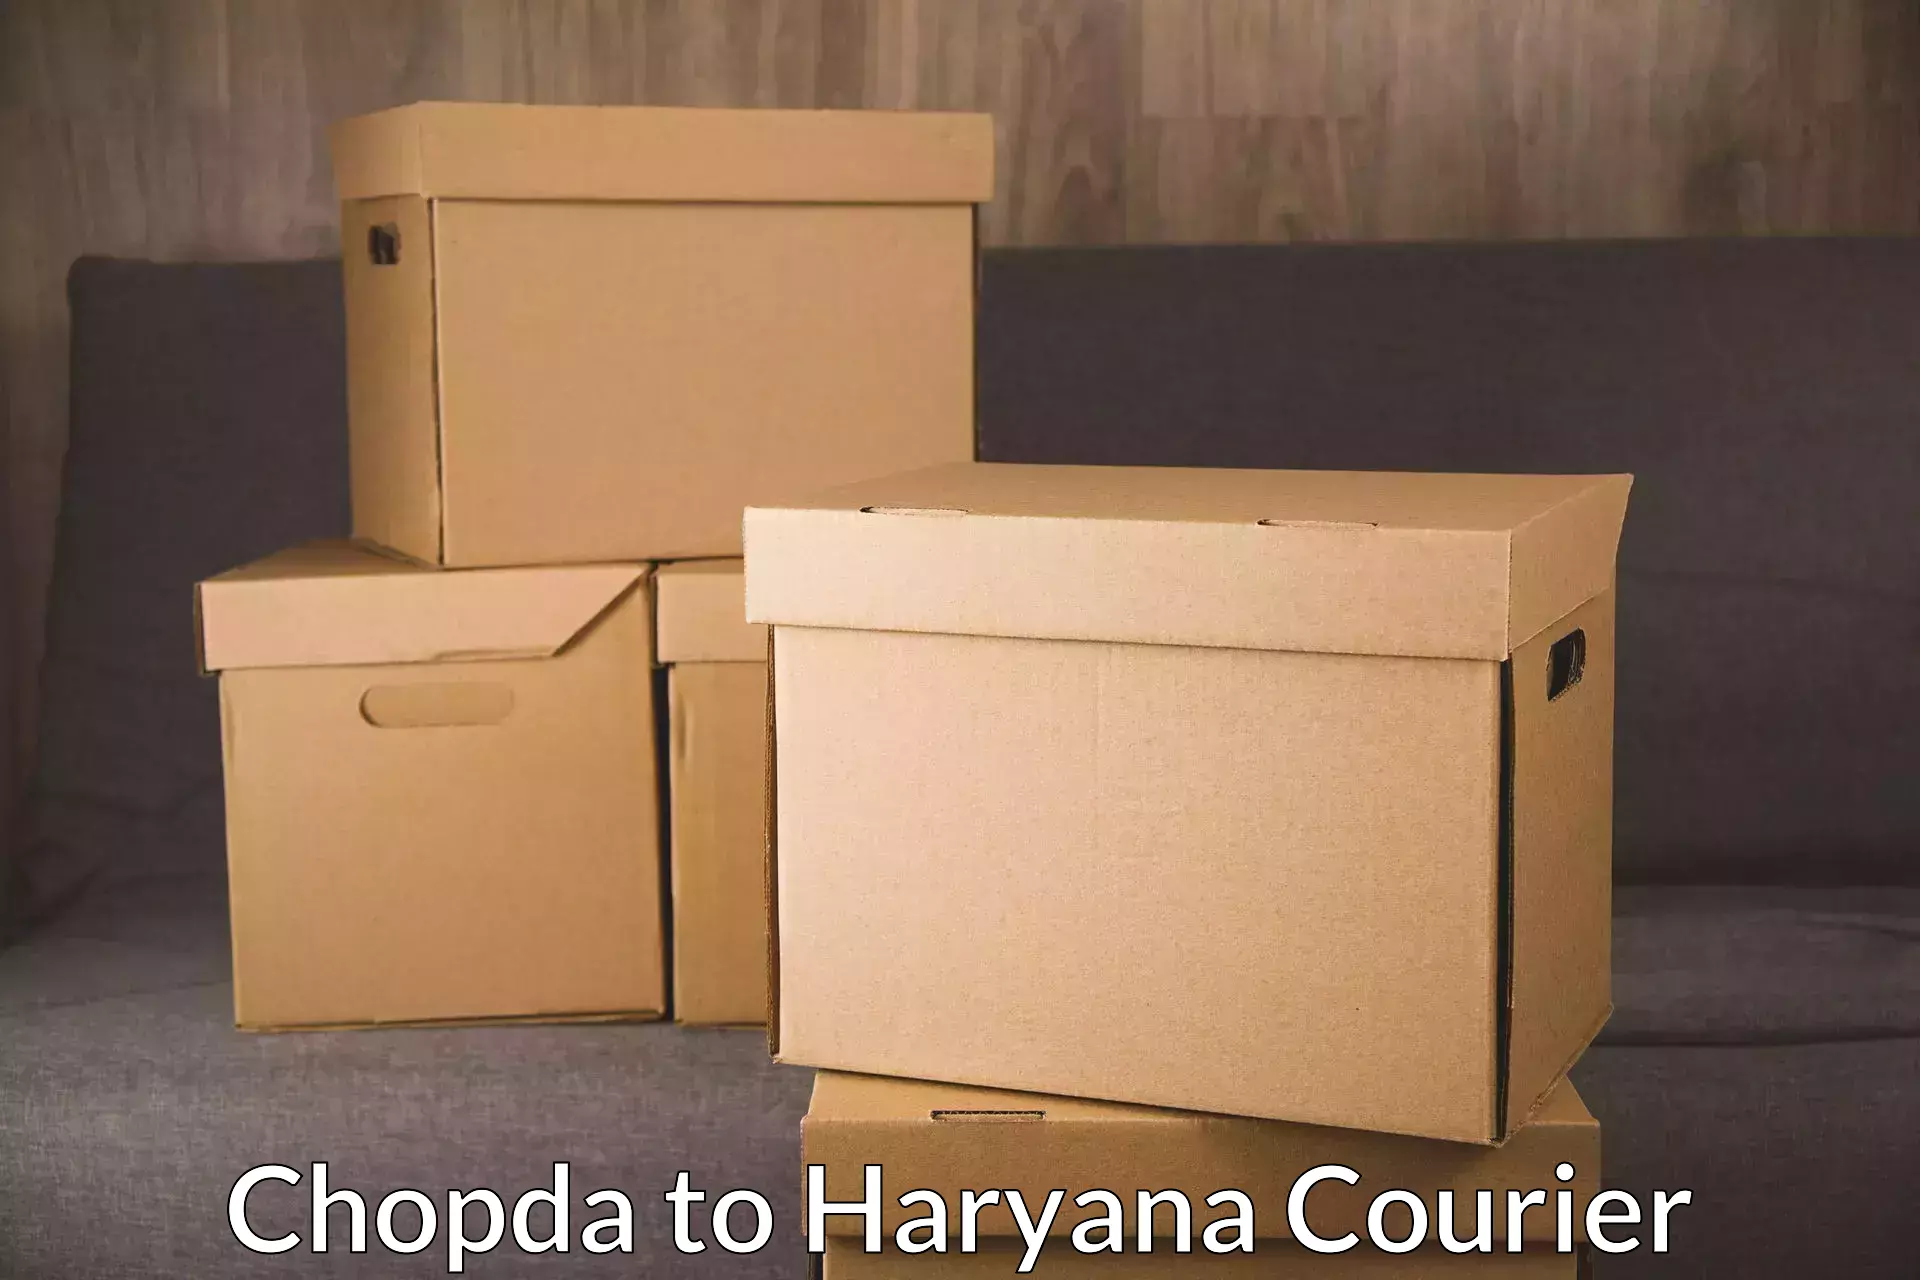 Fast delivery service Chopda to Hansi